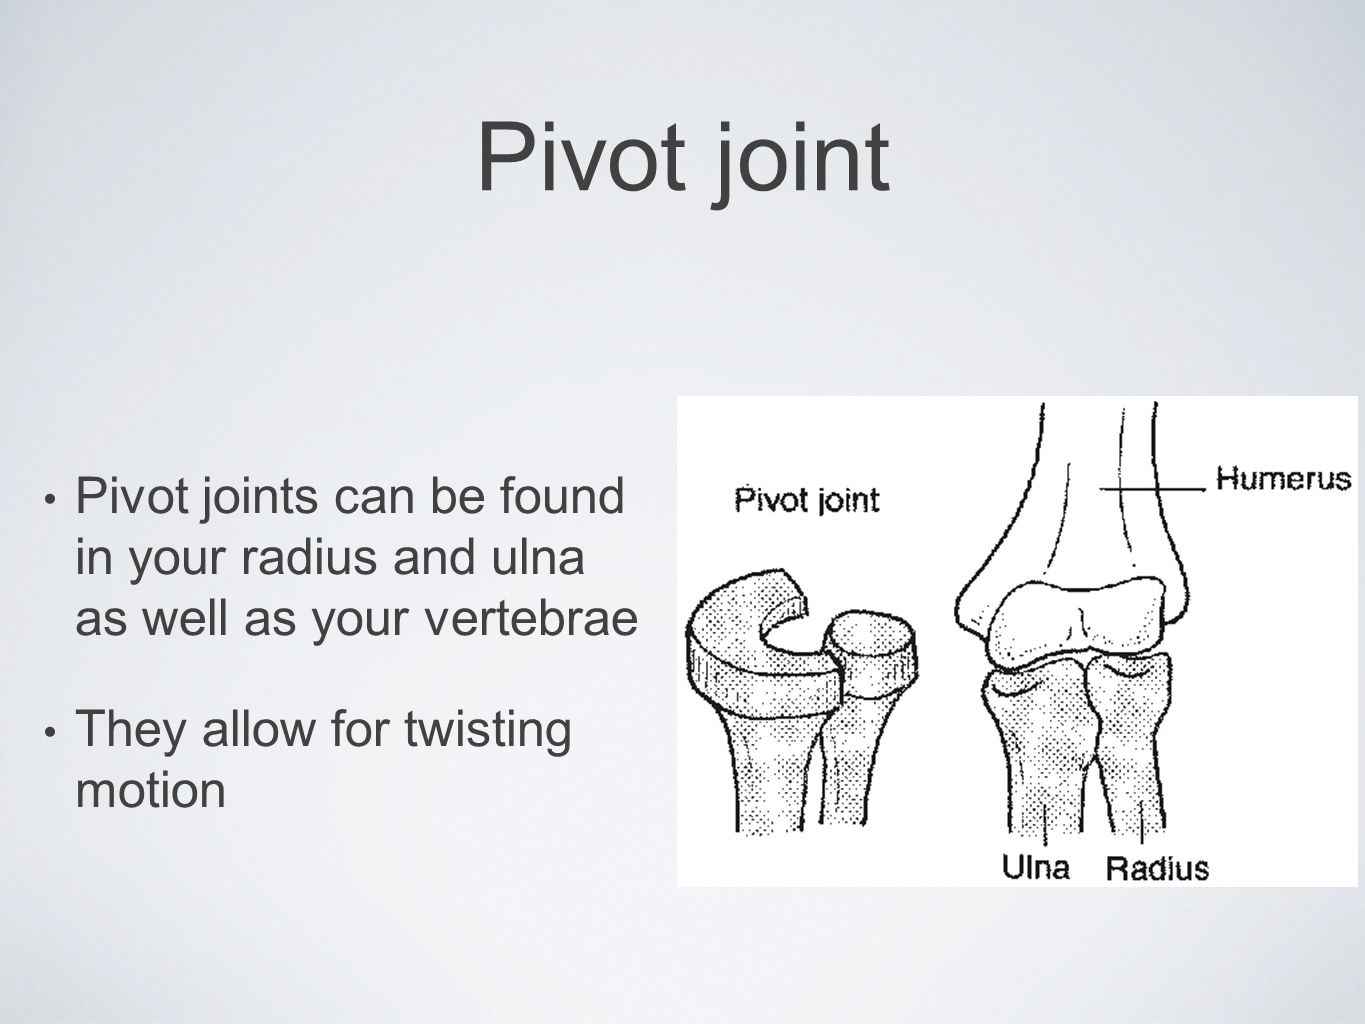 Pivot joint Pivot joints can be found in your radius and ulna as well as your vertebrae.